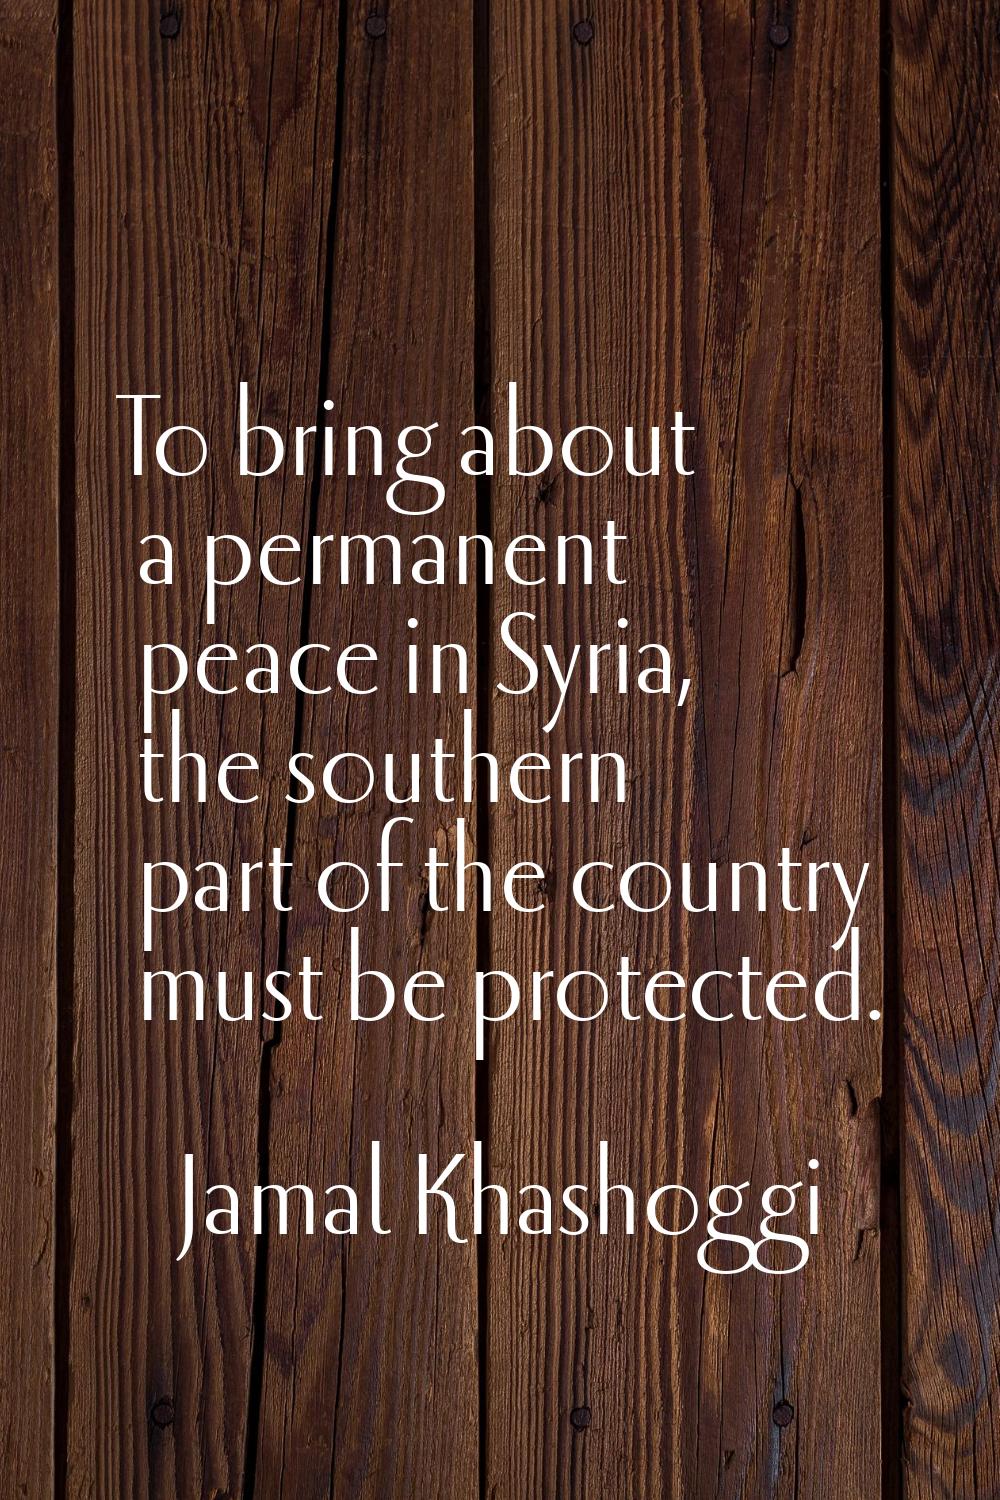 To bring about a permanent peace in Syria, the southern part of the country must be protected.